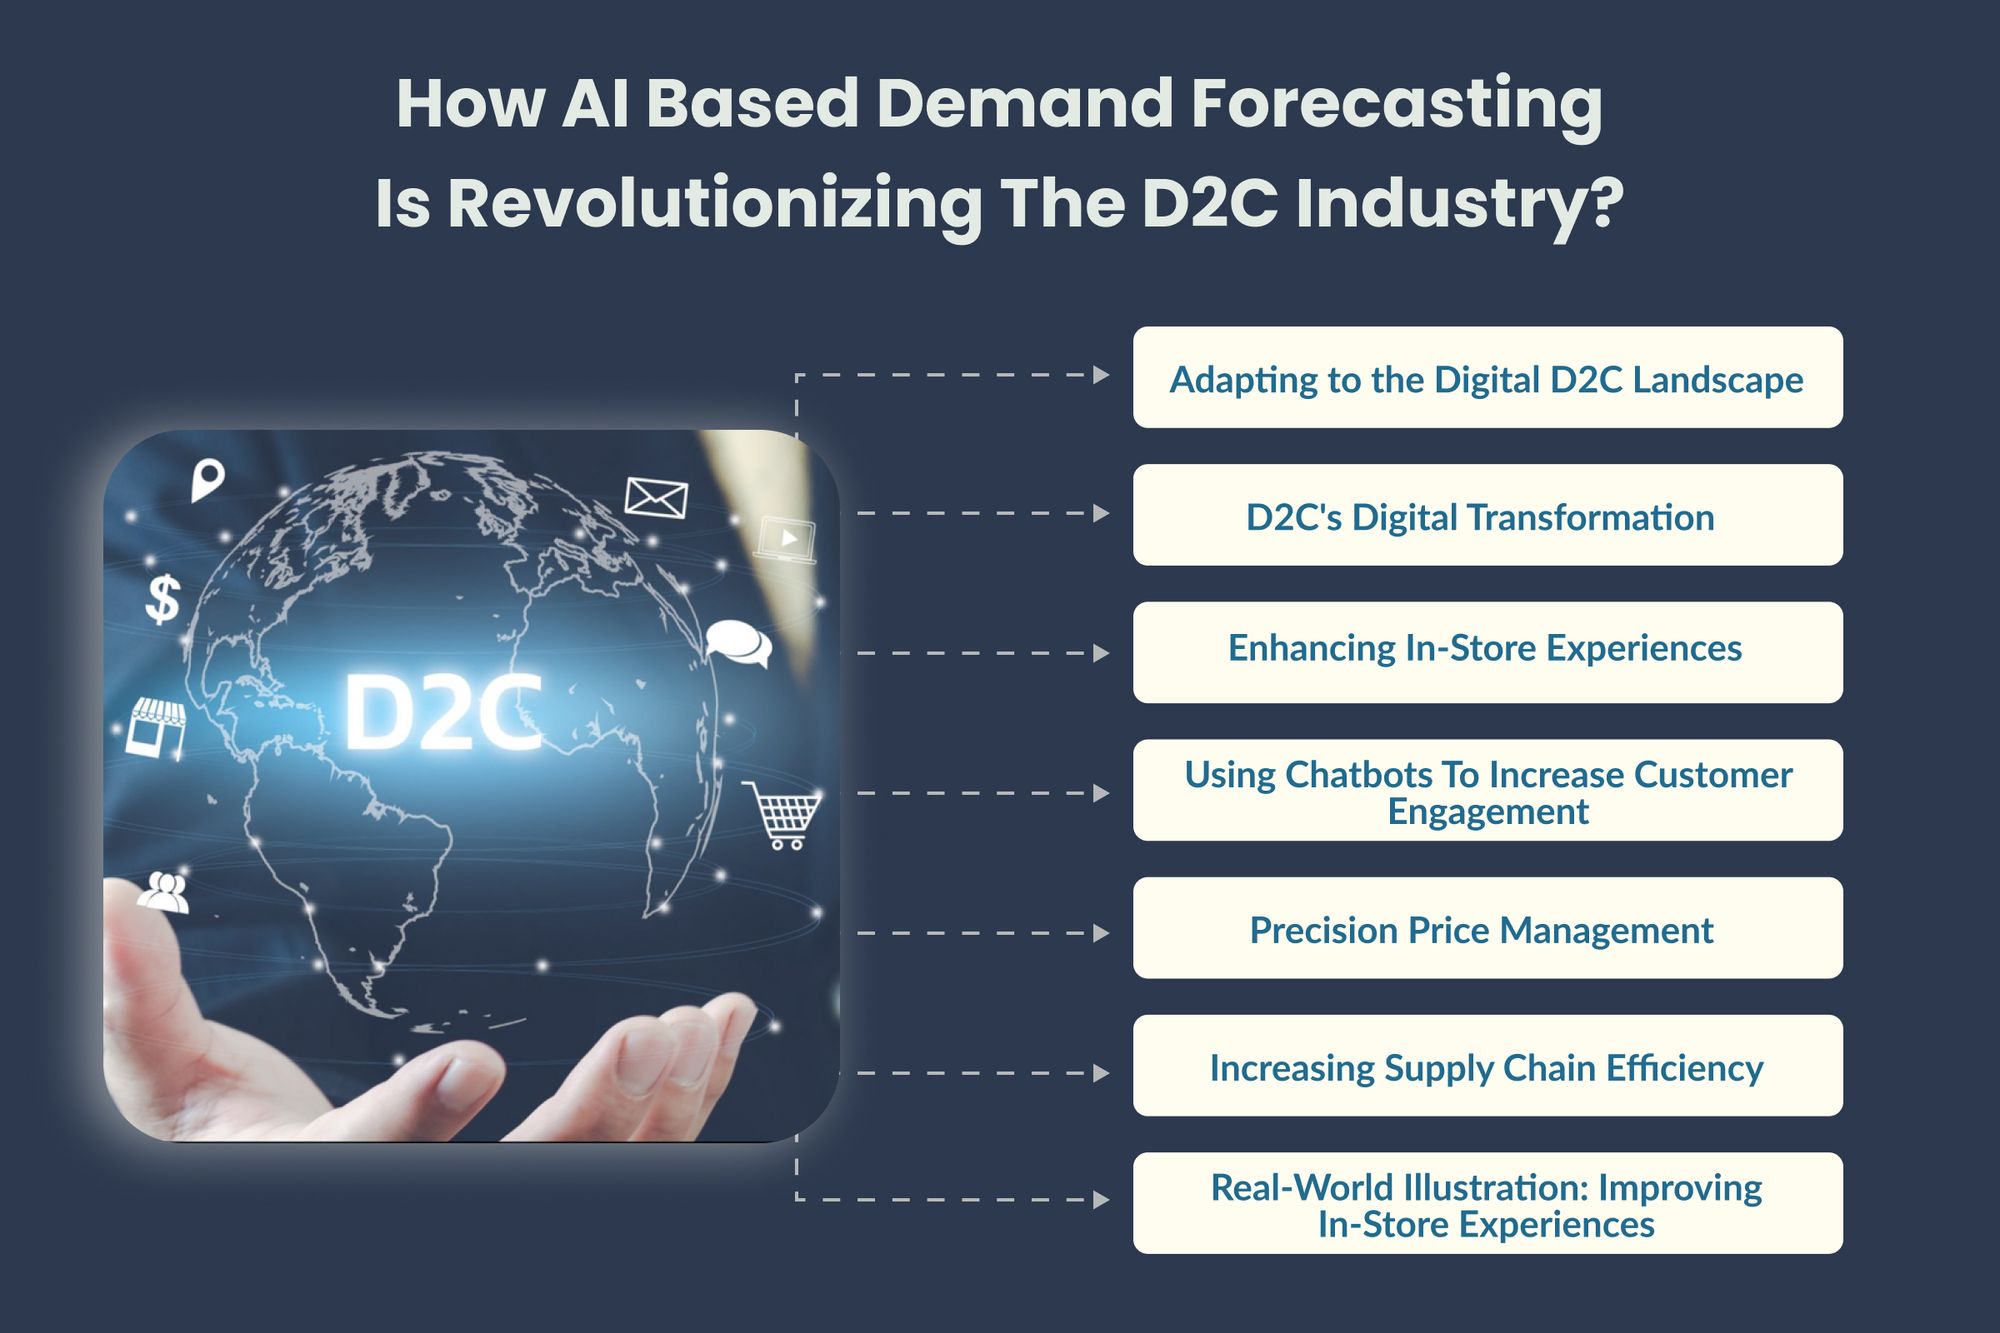 How AI Based Demand Forecasting Is Revolutionizing The D2C Industry?